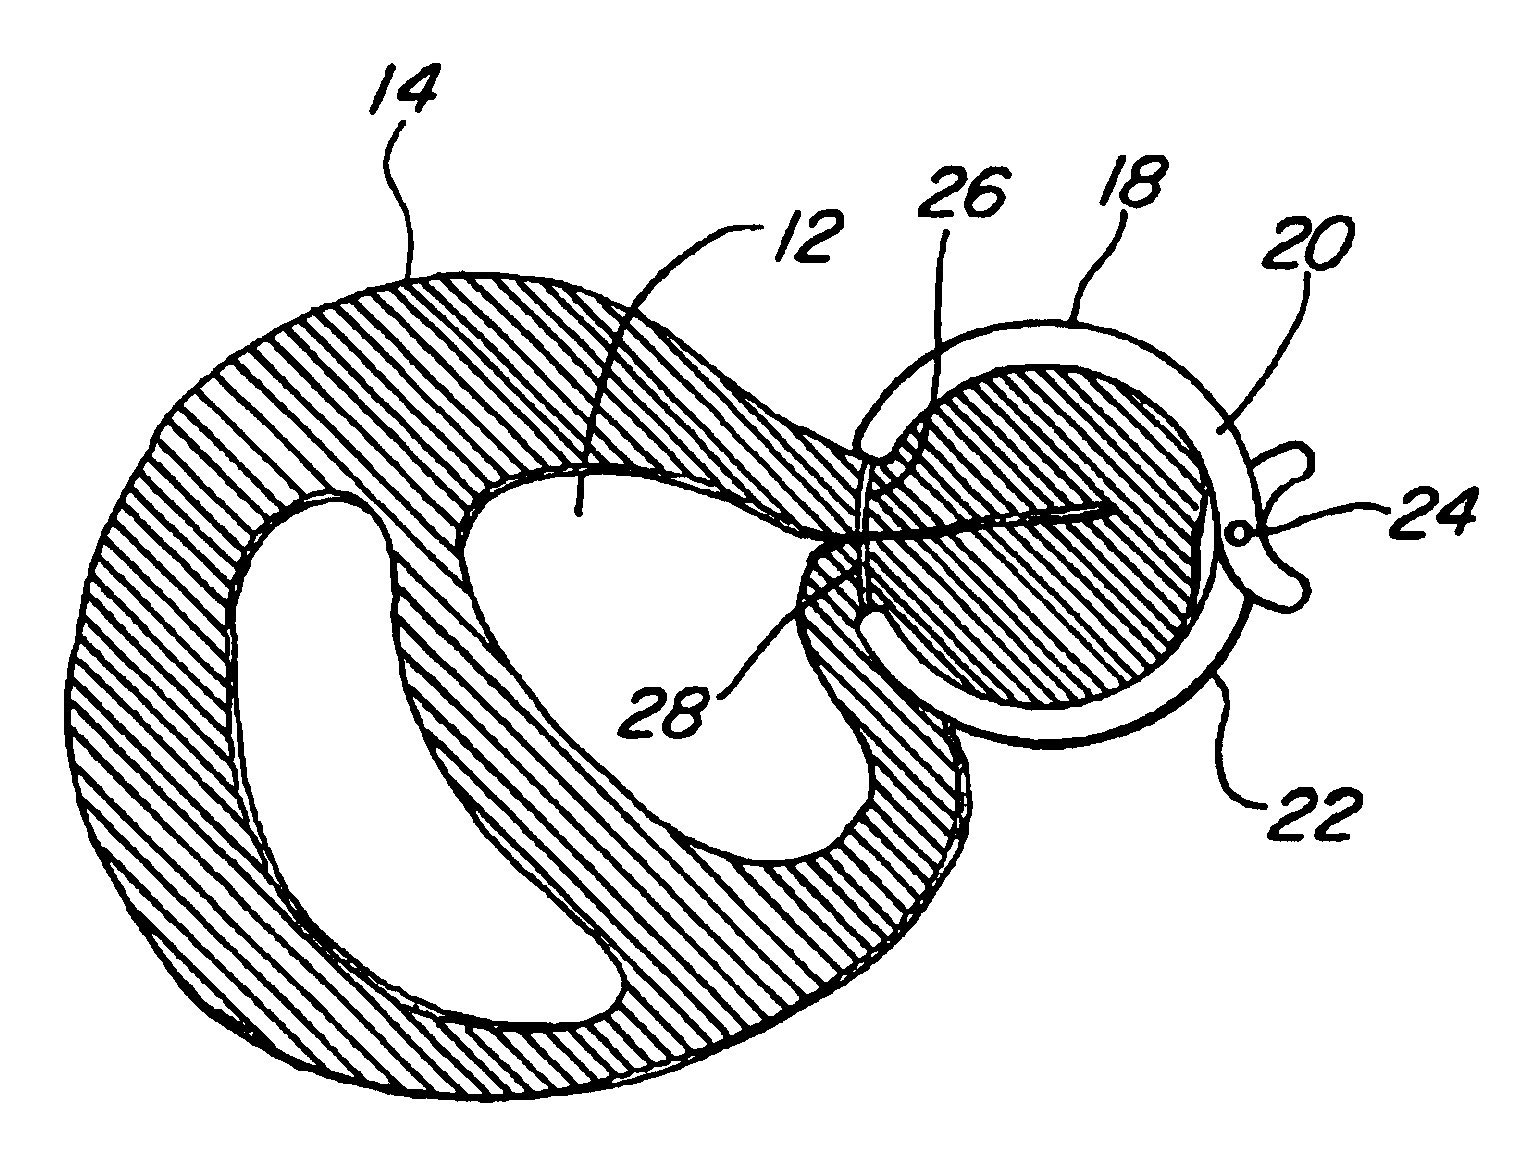 Device and method for treatment of congestive heart failure